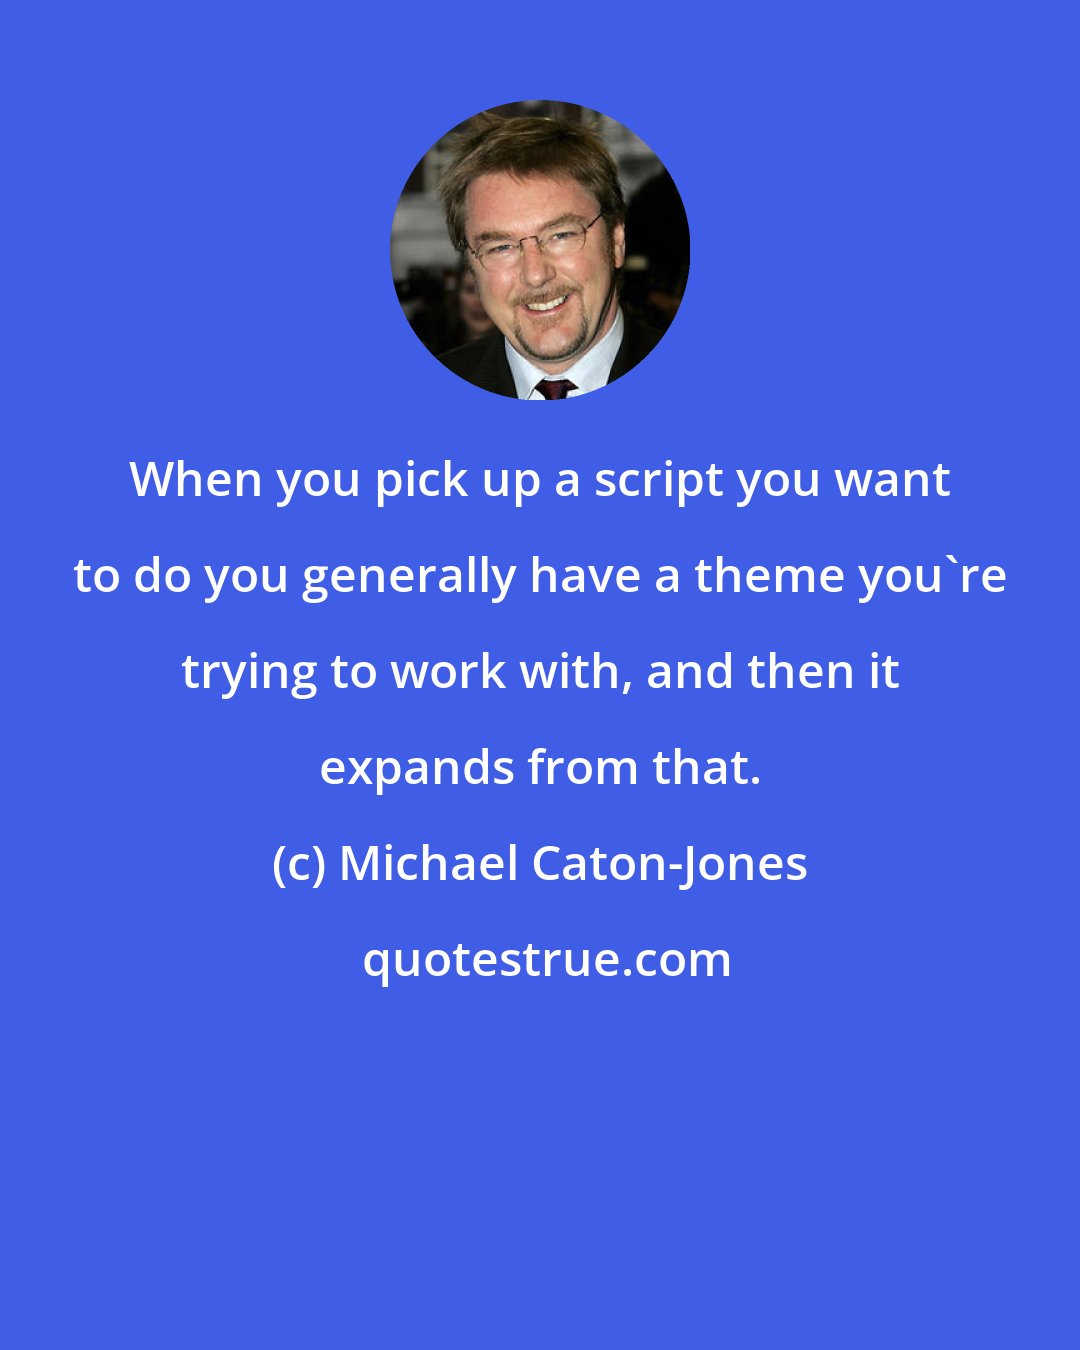 Michael Caton-Jones: When you pick up a script you want to do you generally have a theme you're trying to work with, and then it expands from that.